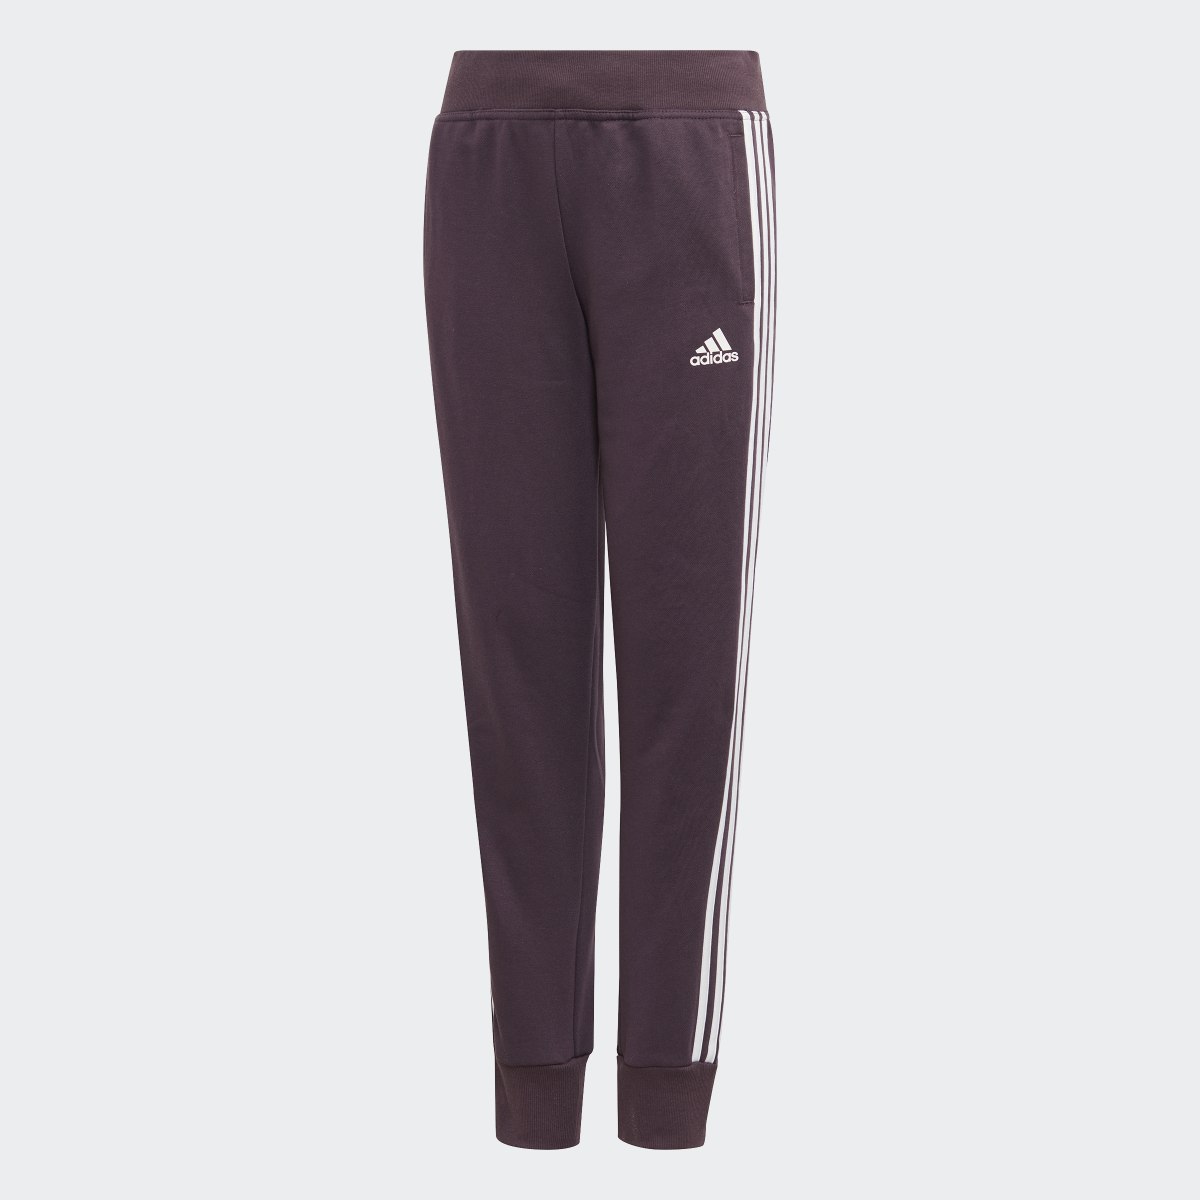 Adidas Hooded Cotton Track Suit. 4